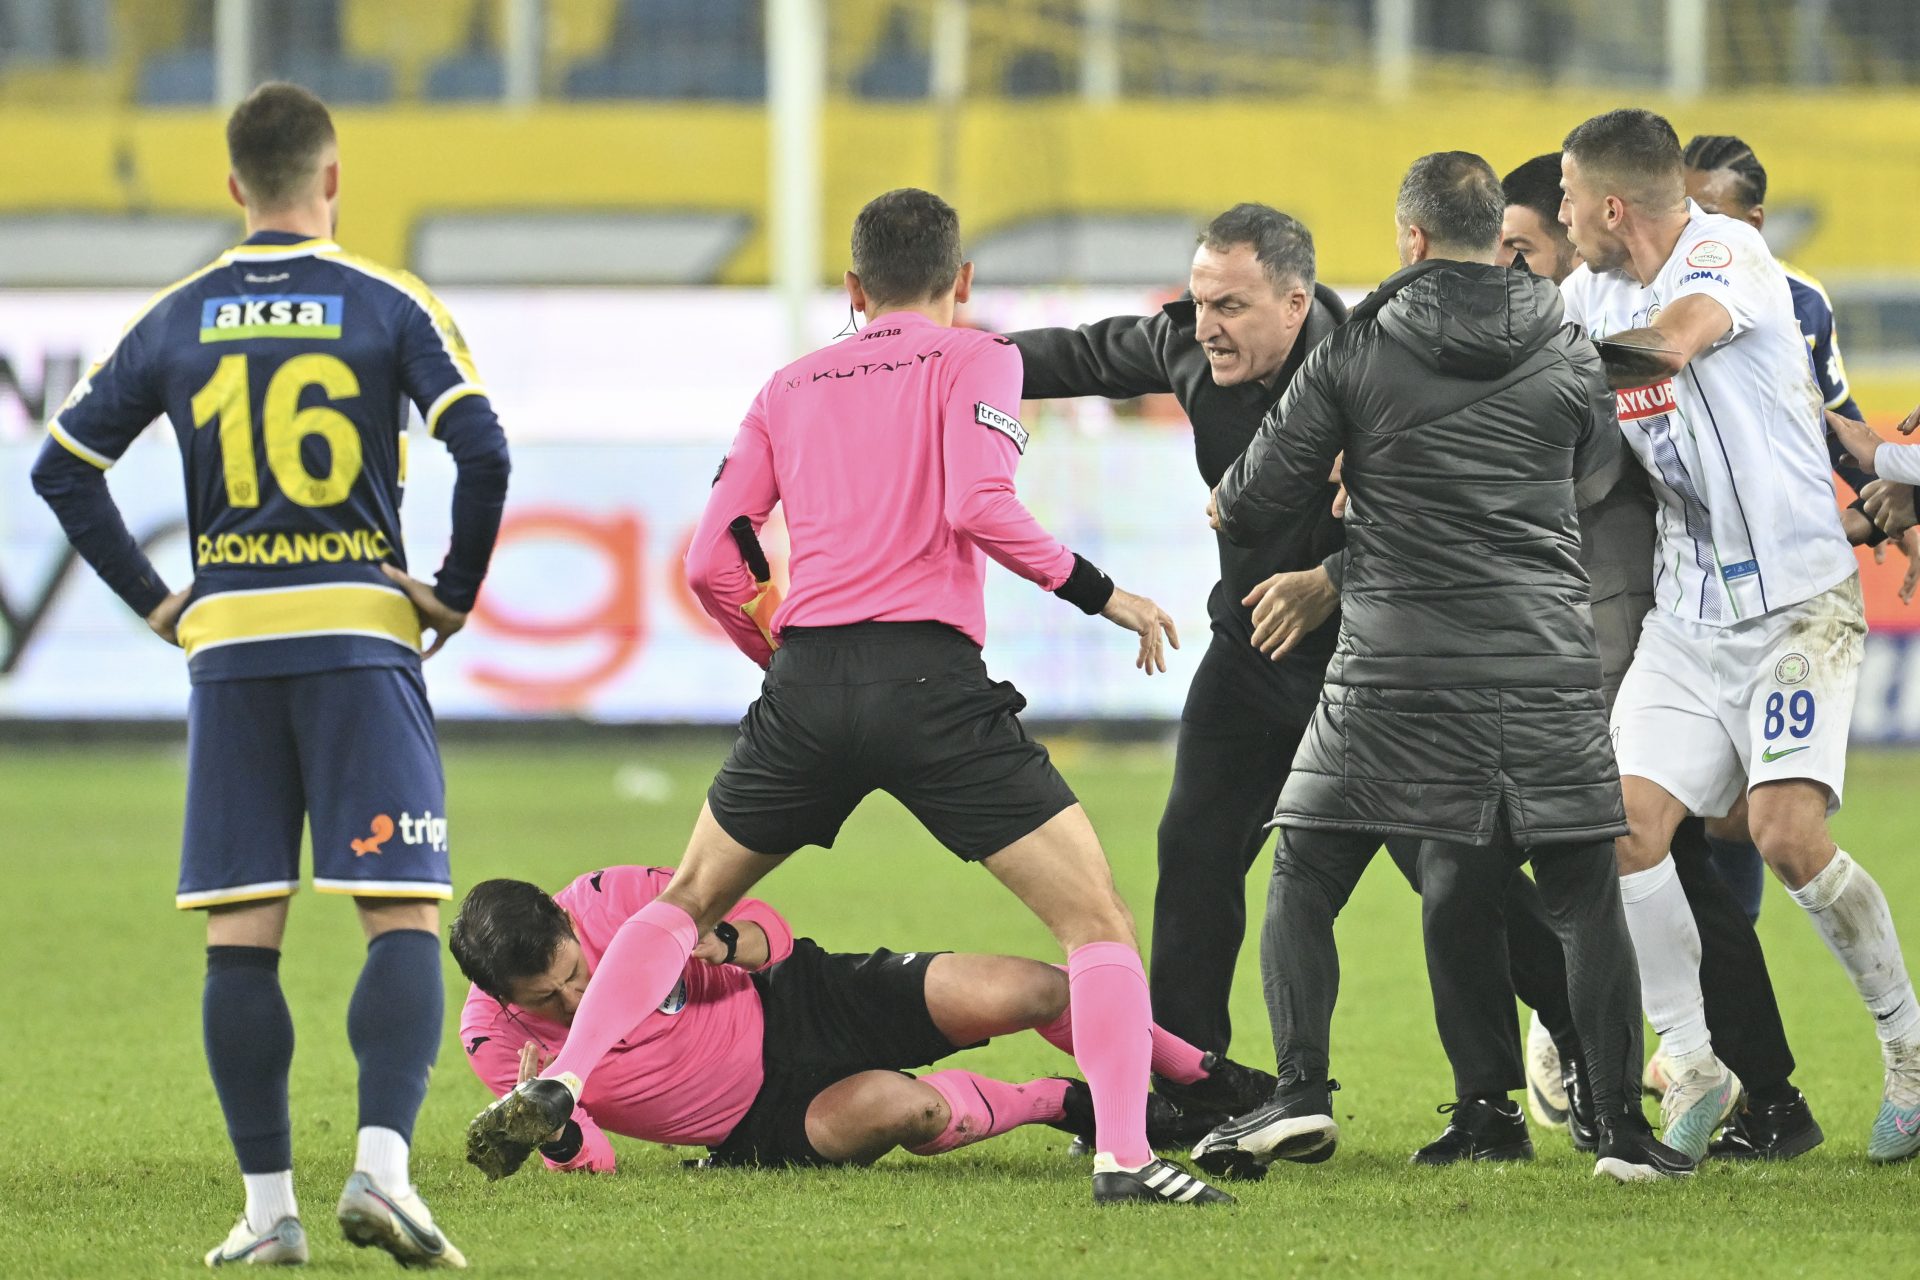 Football's dark side: The most horrific attacks on referees